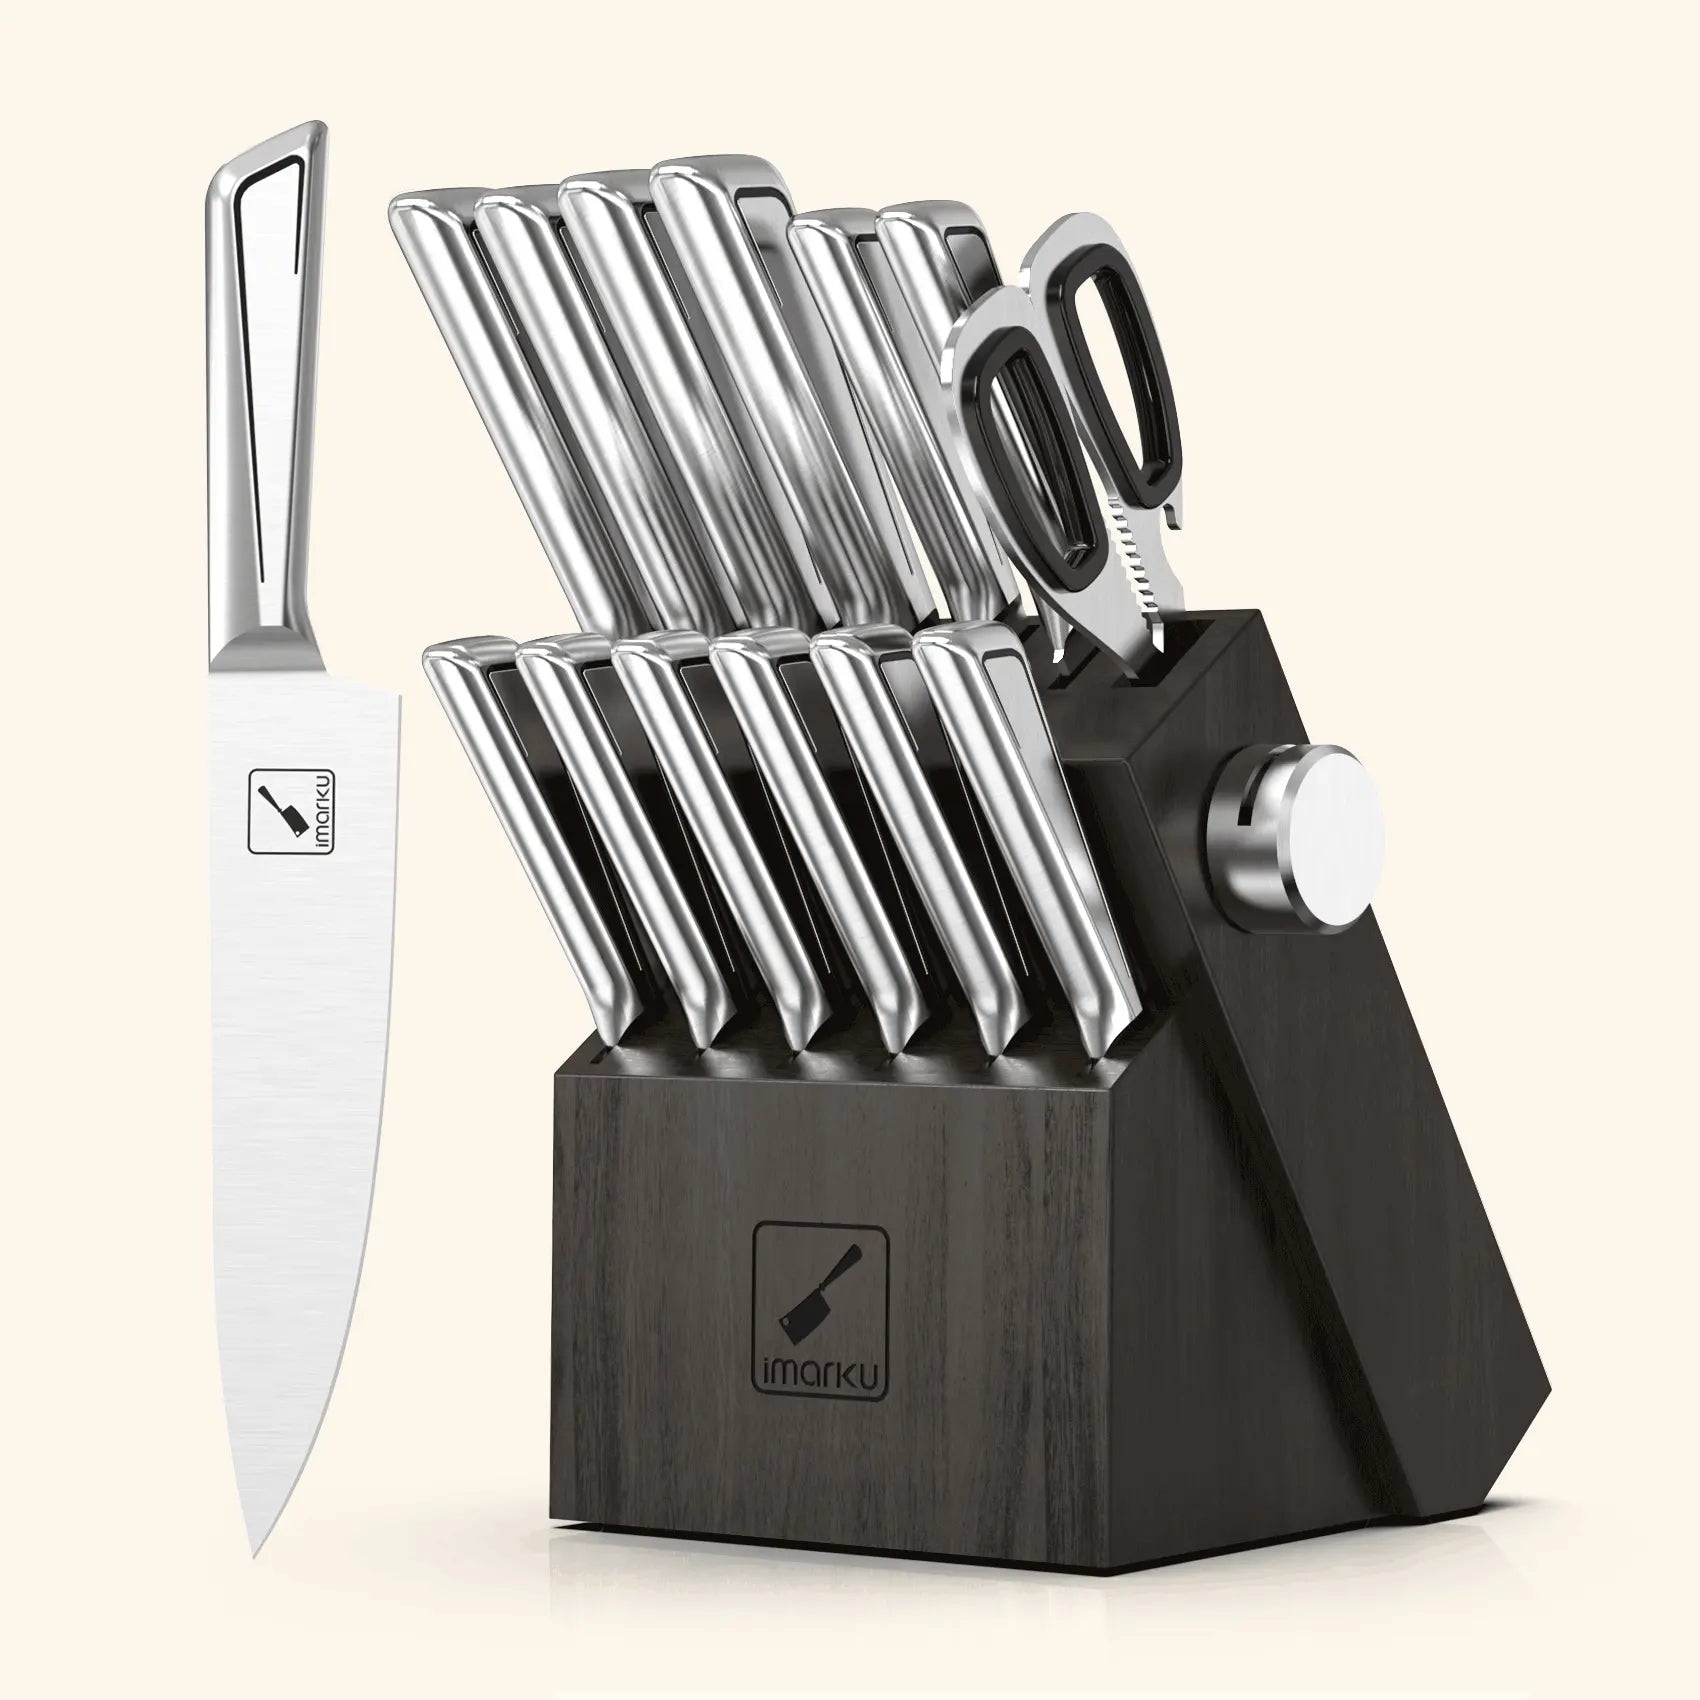 Safeguard Your Fingers with Non-Slip Knife Set - IMARKU